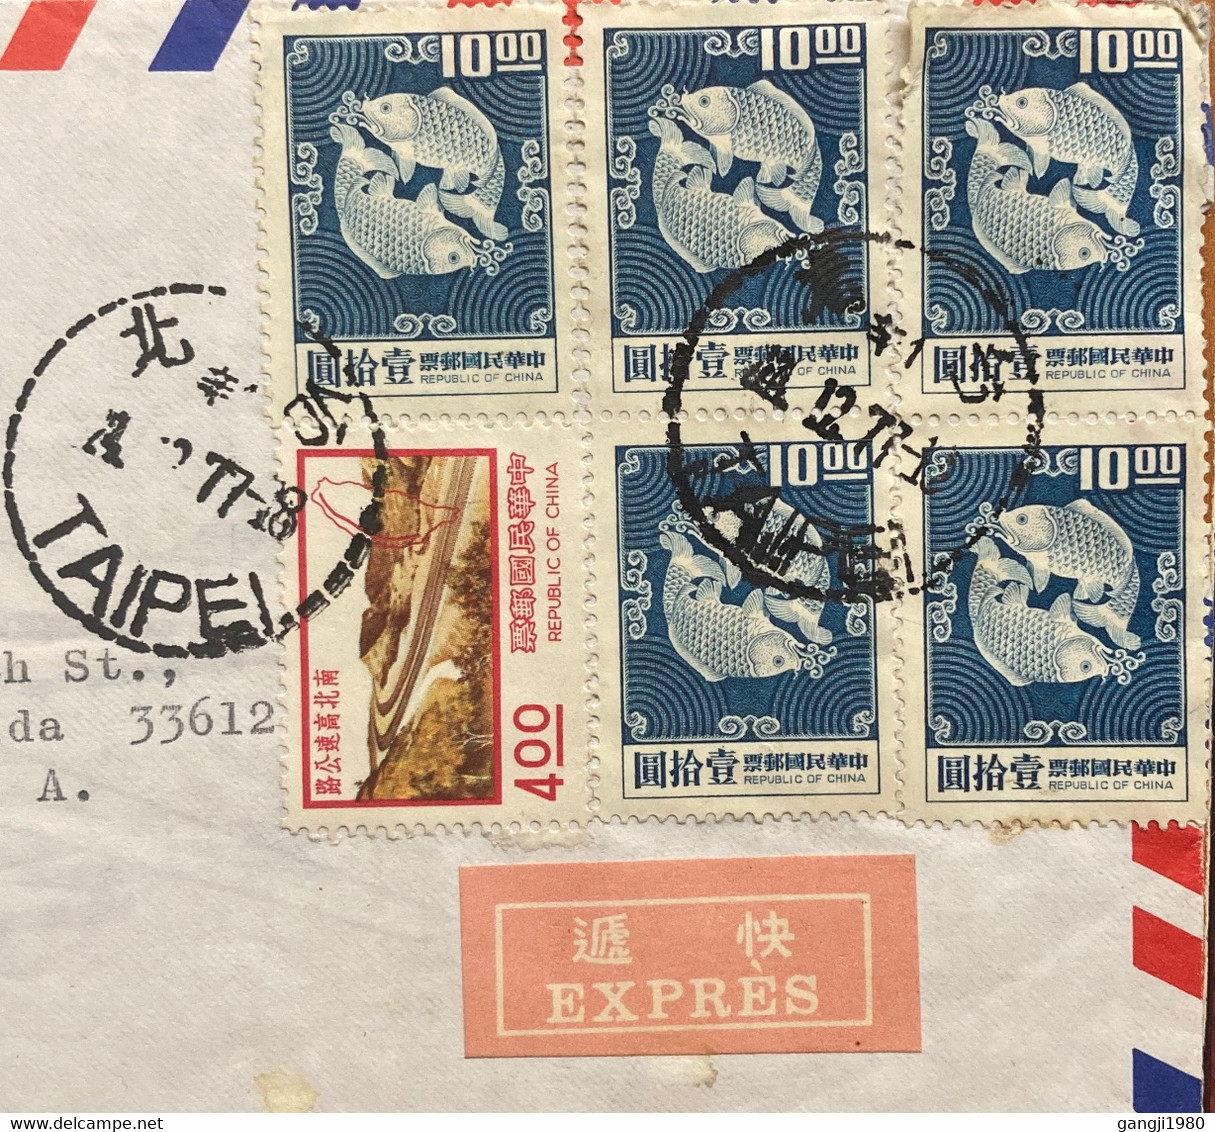 CHINA TAIWAN-1977, VIGNETTE “EXPRESS” LABEL USED COVER TO USA ,TUNG FOOK TRADING CO.ADVT PICTURE MATCHING FISH, SAME STA - Lettres & Documents